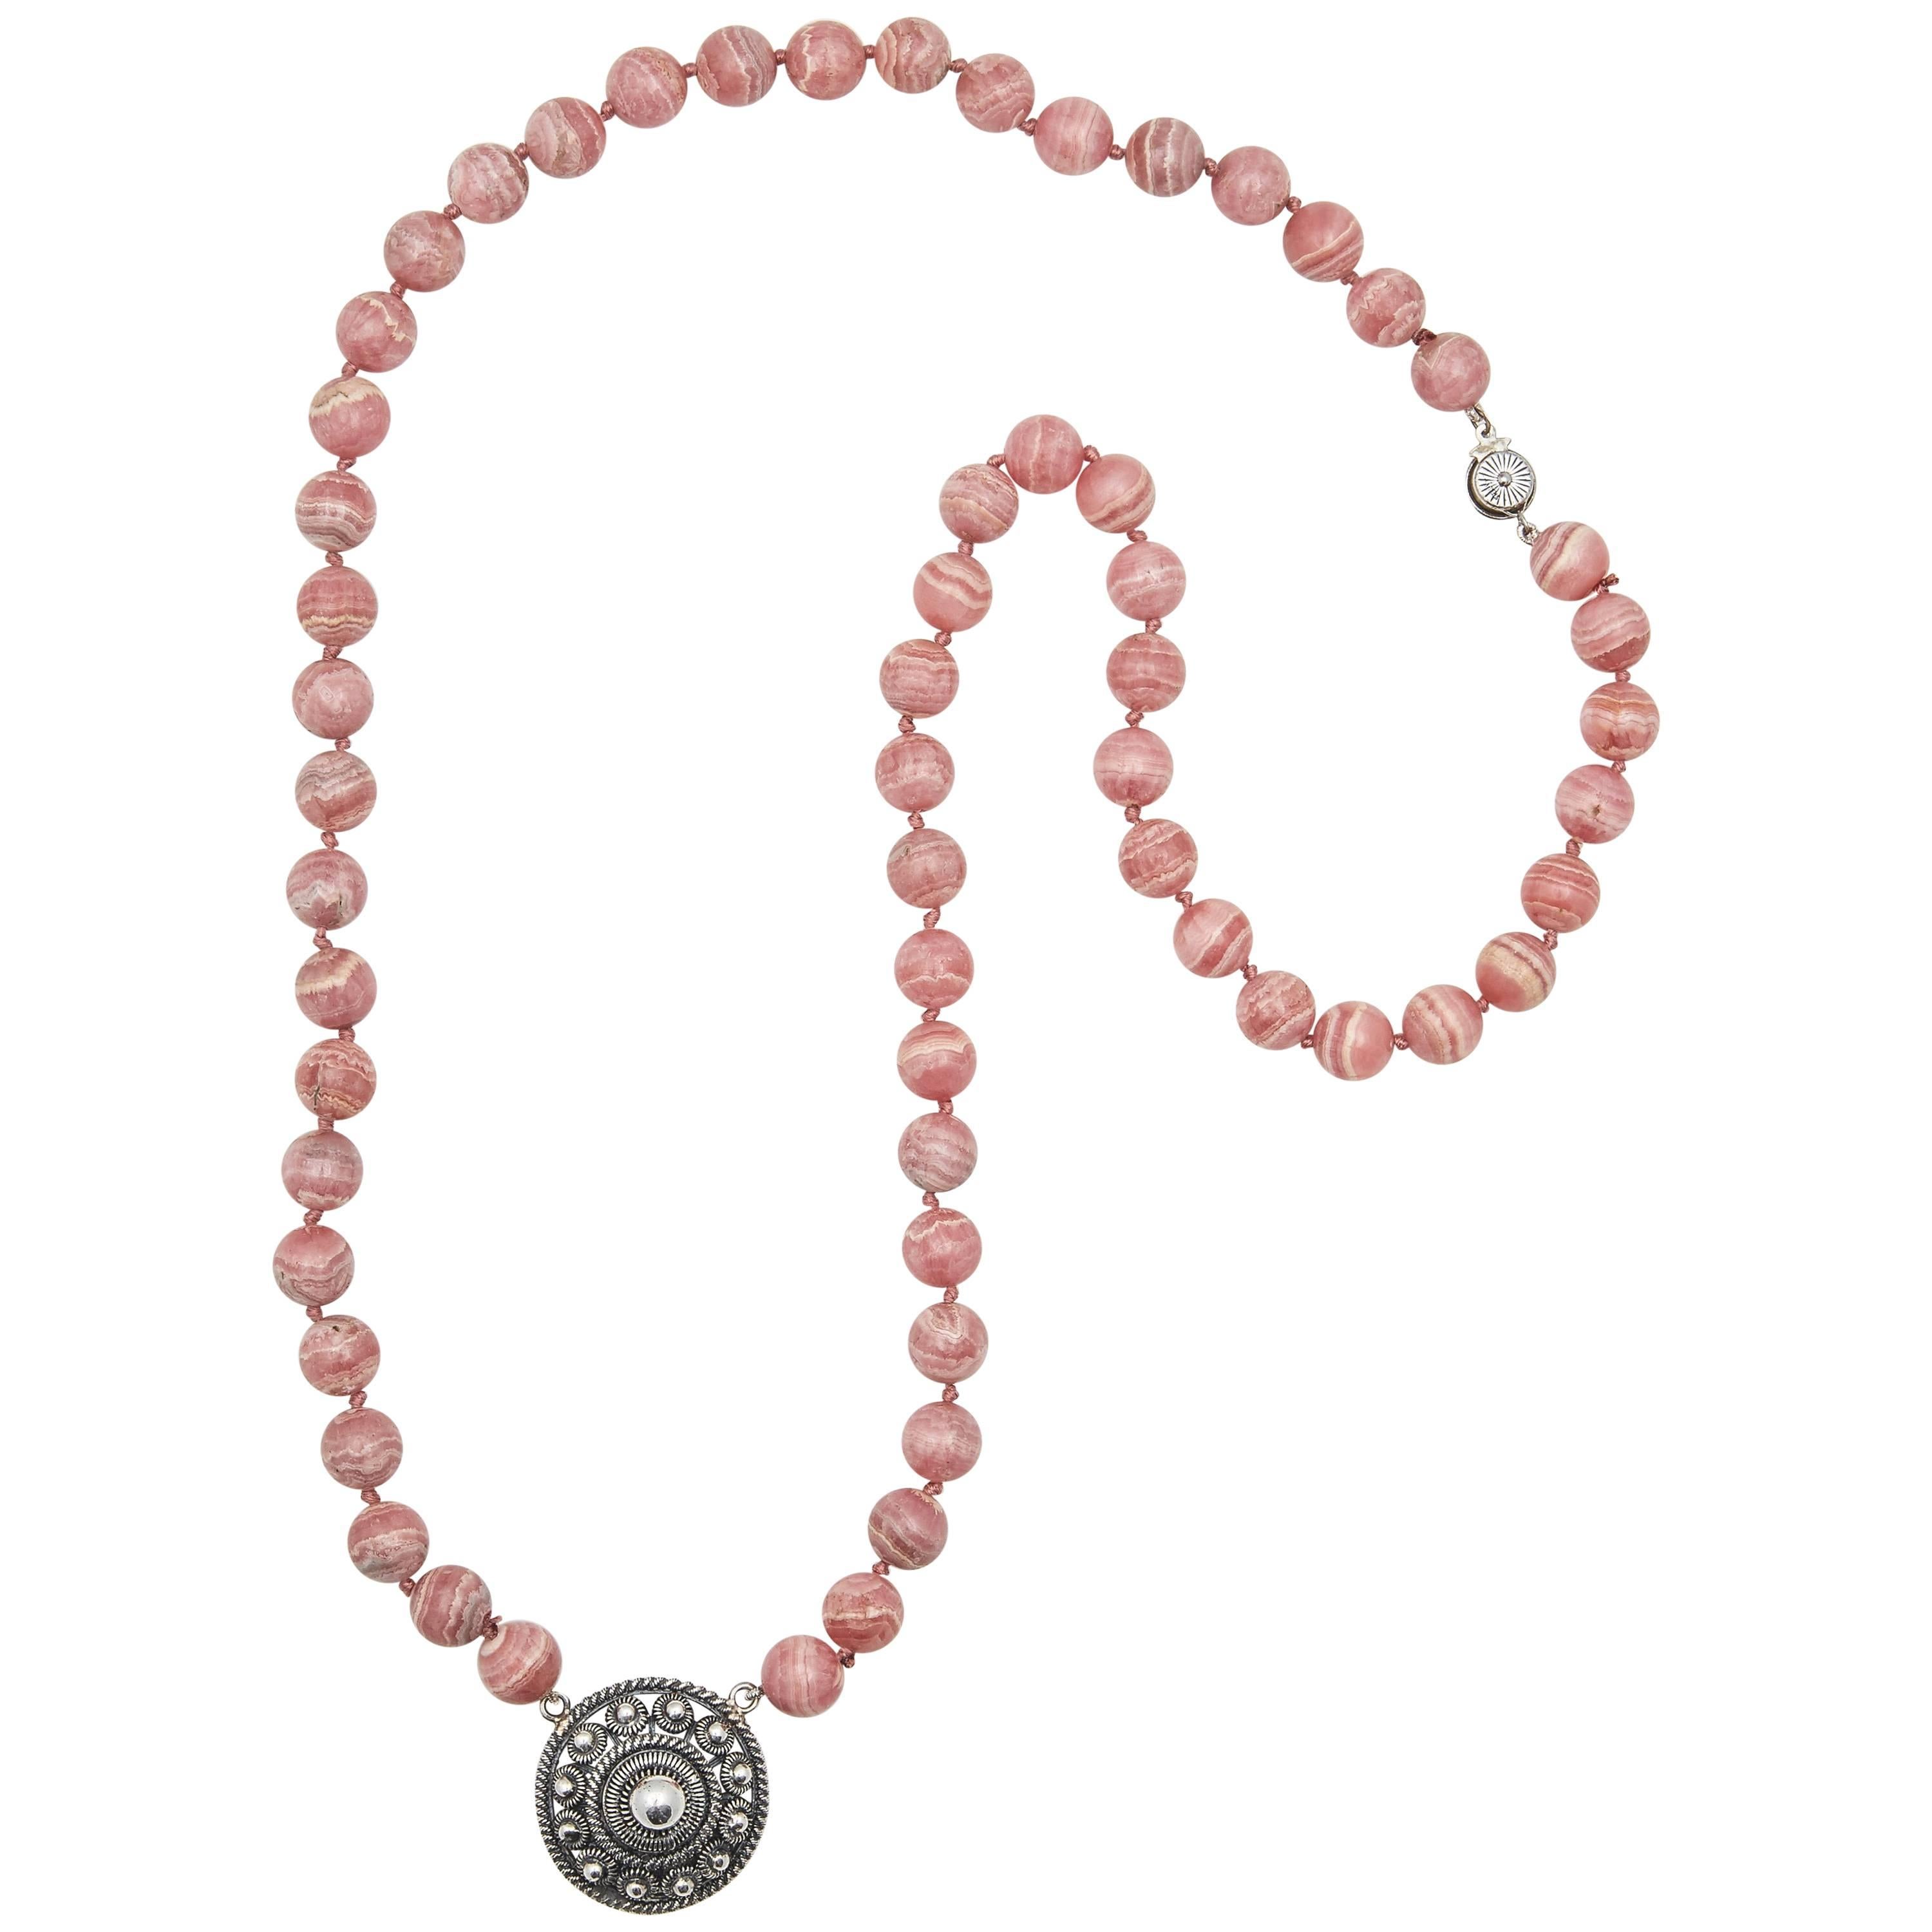 Rhodochrosite Beaded Necklace with Silver Rondelle Pendant, 20th century For Sale